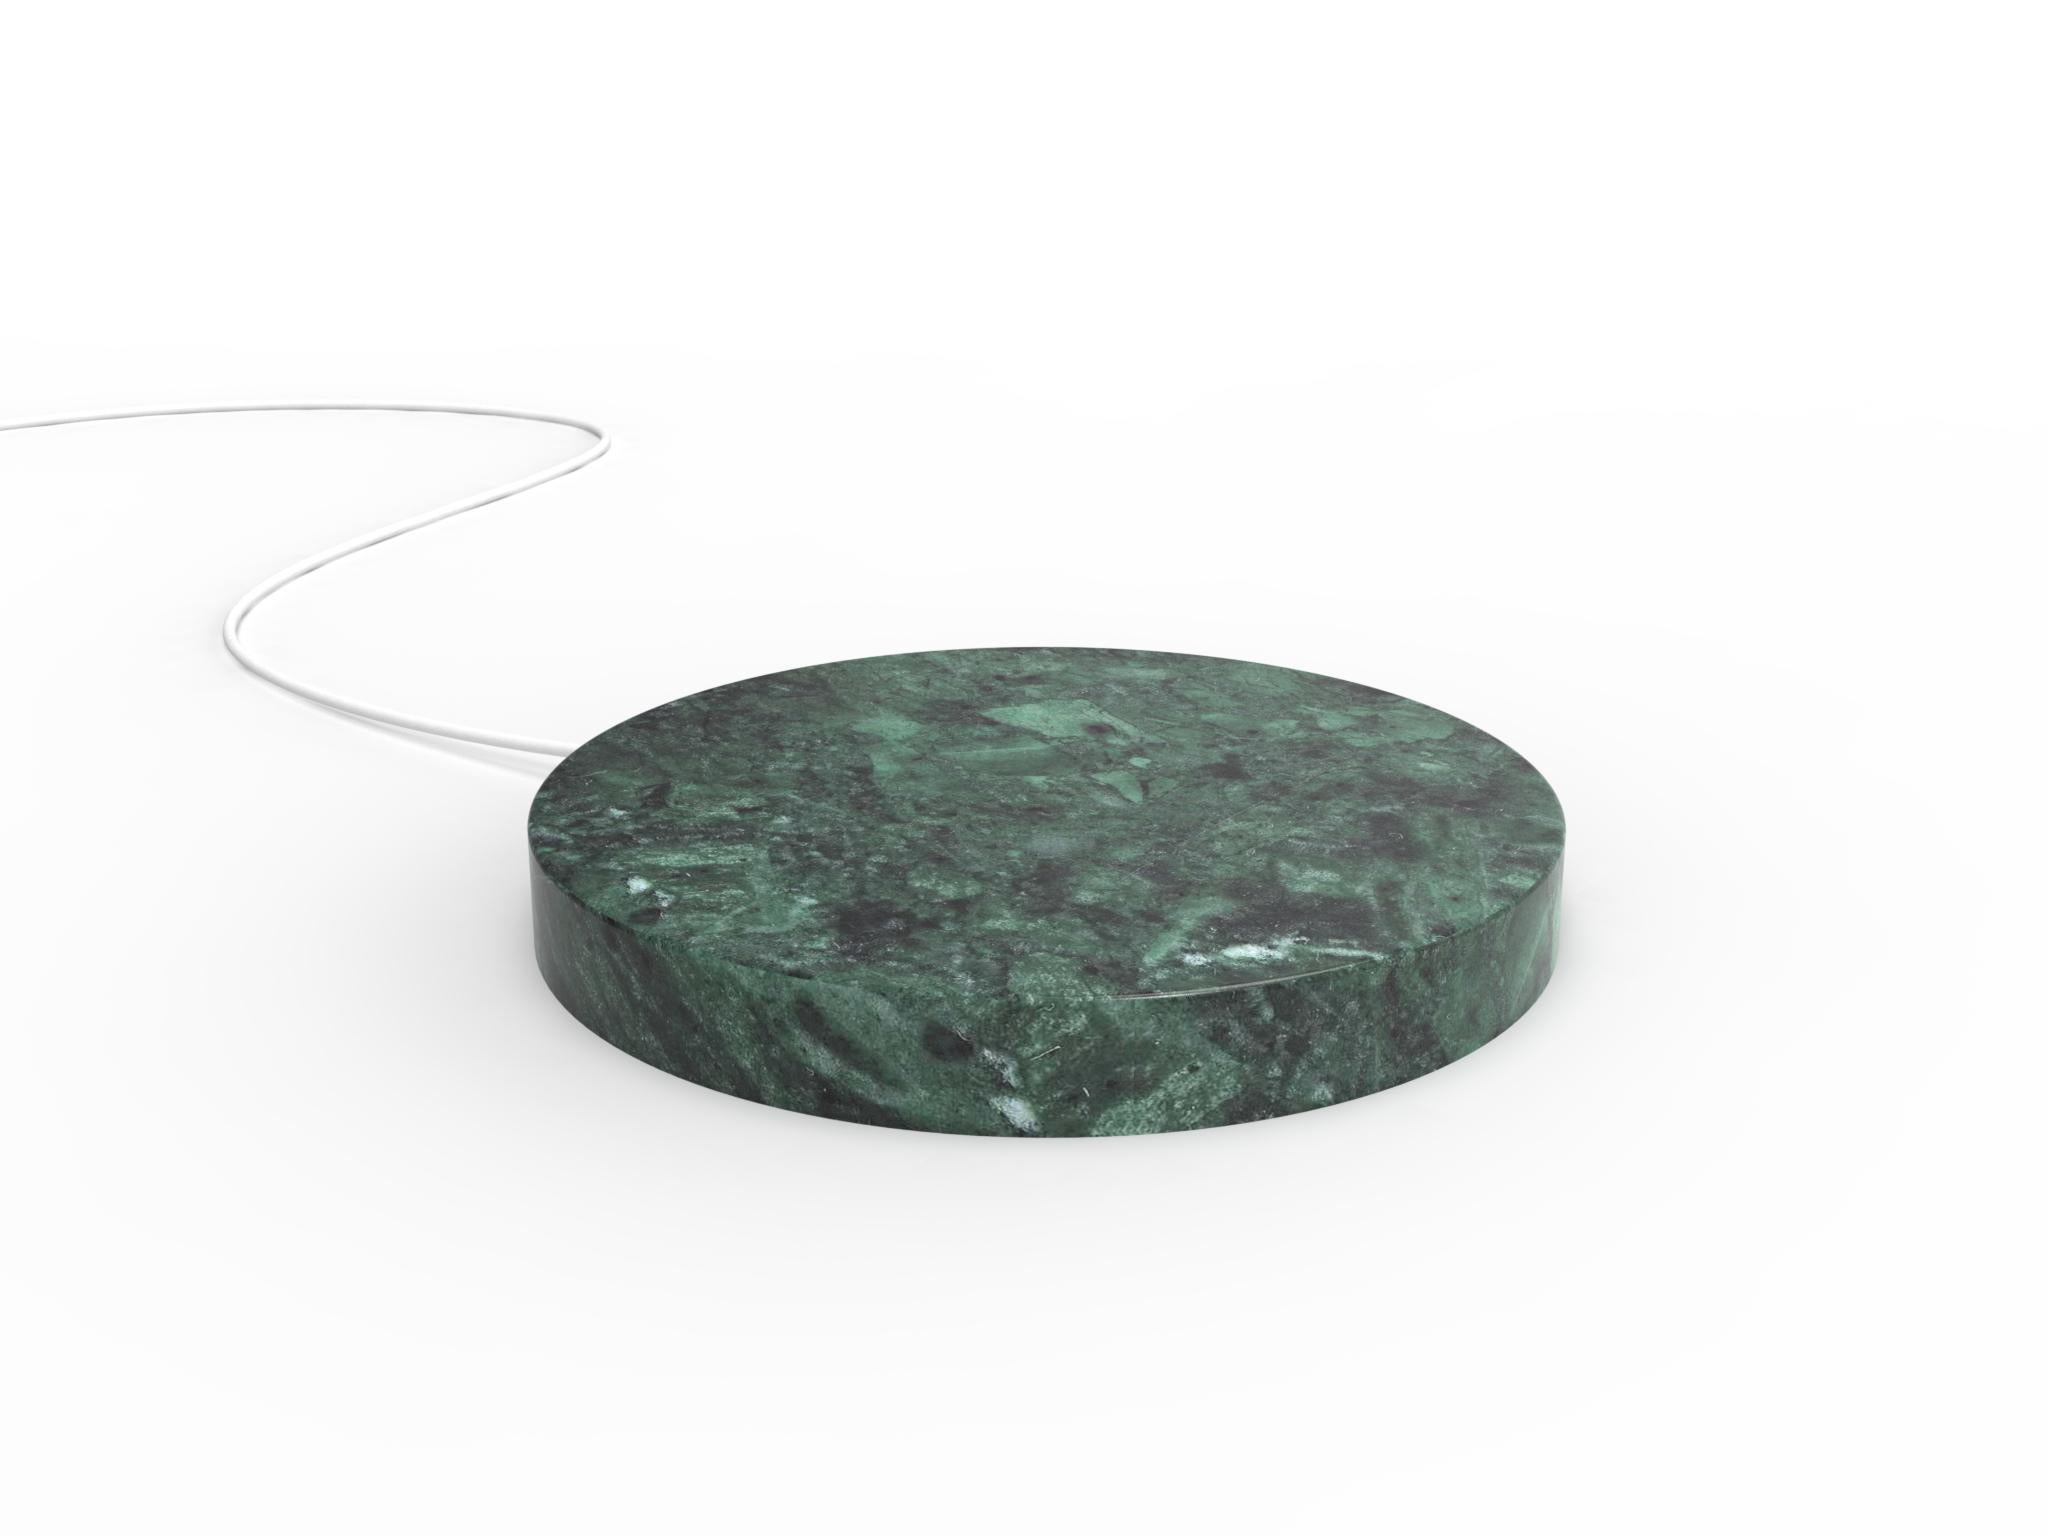 A marble base,
that quickly charge your phone, with a touch of magic.
 
A circle,
a stone,
realized with the care that marble requires.

A powerful wireless charging technology ensures an efficient and reliable power delivery.

The result is a